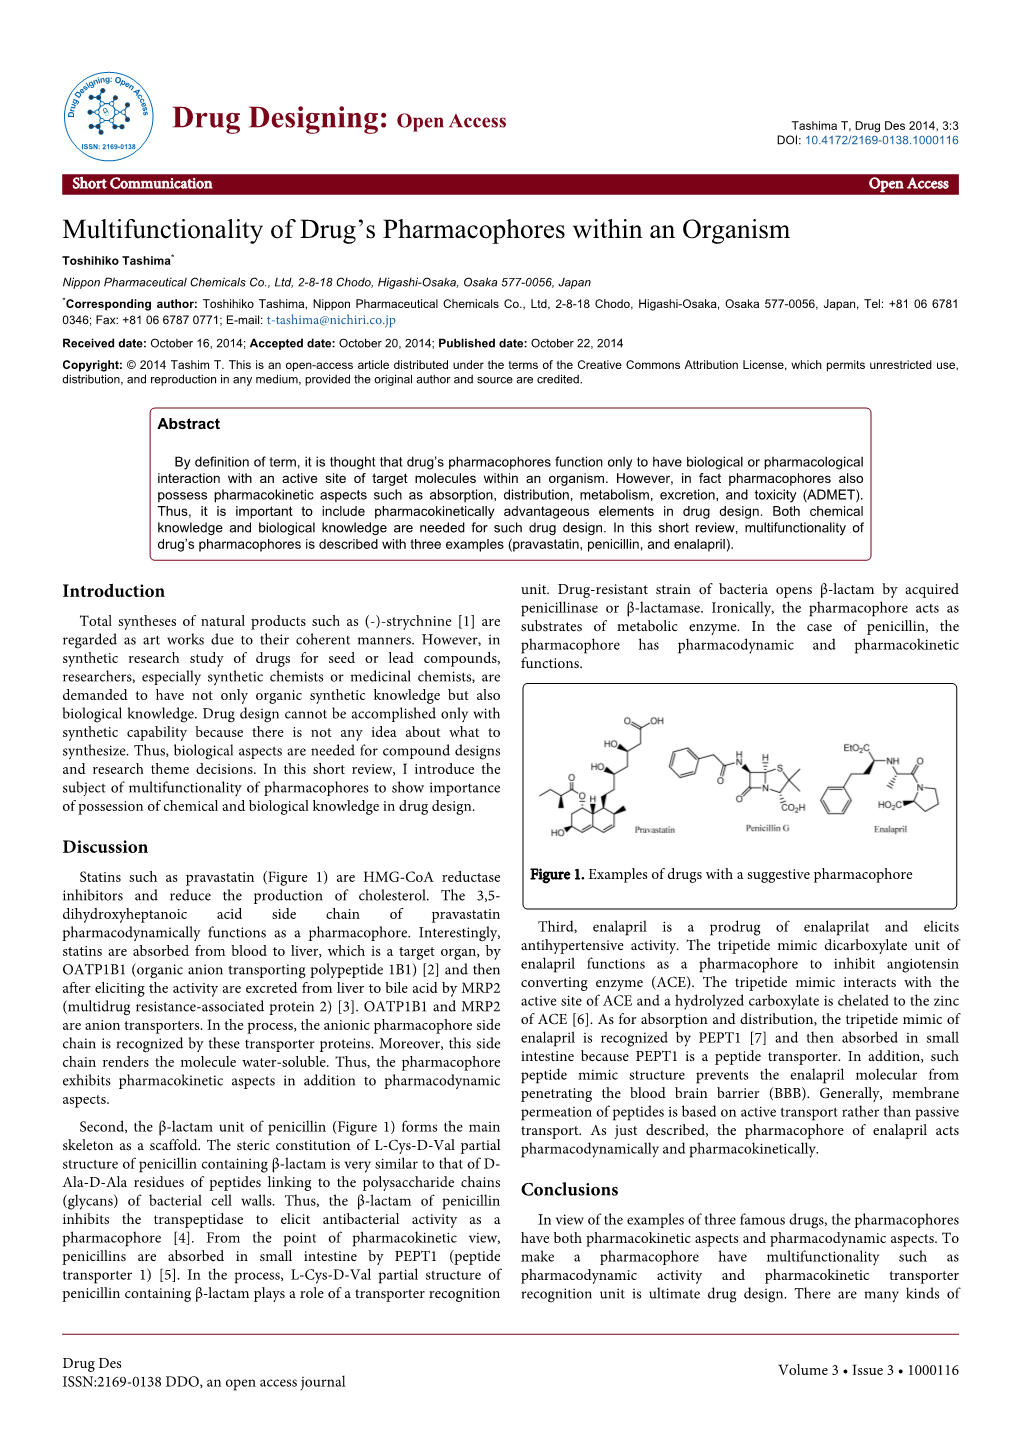 Multifunctionality of Drug's Pharmacophores Within an Organism